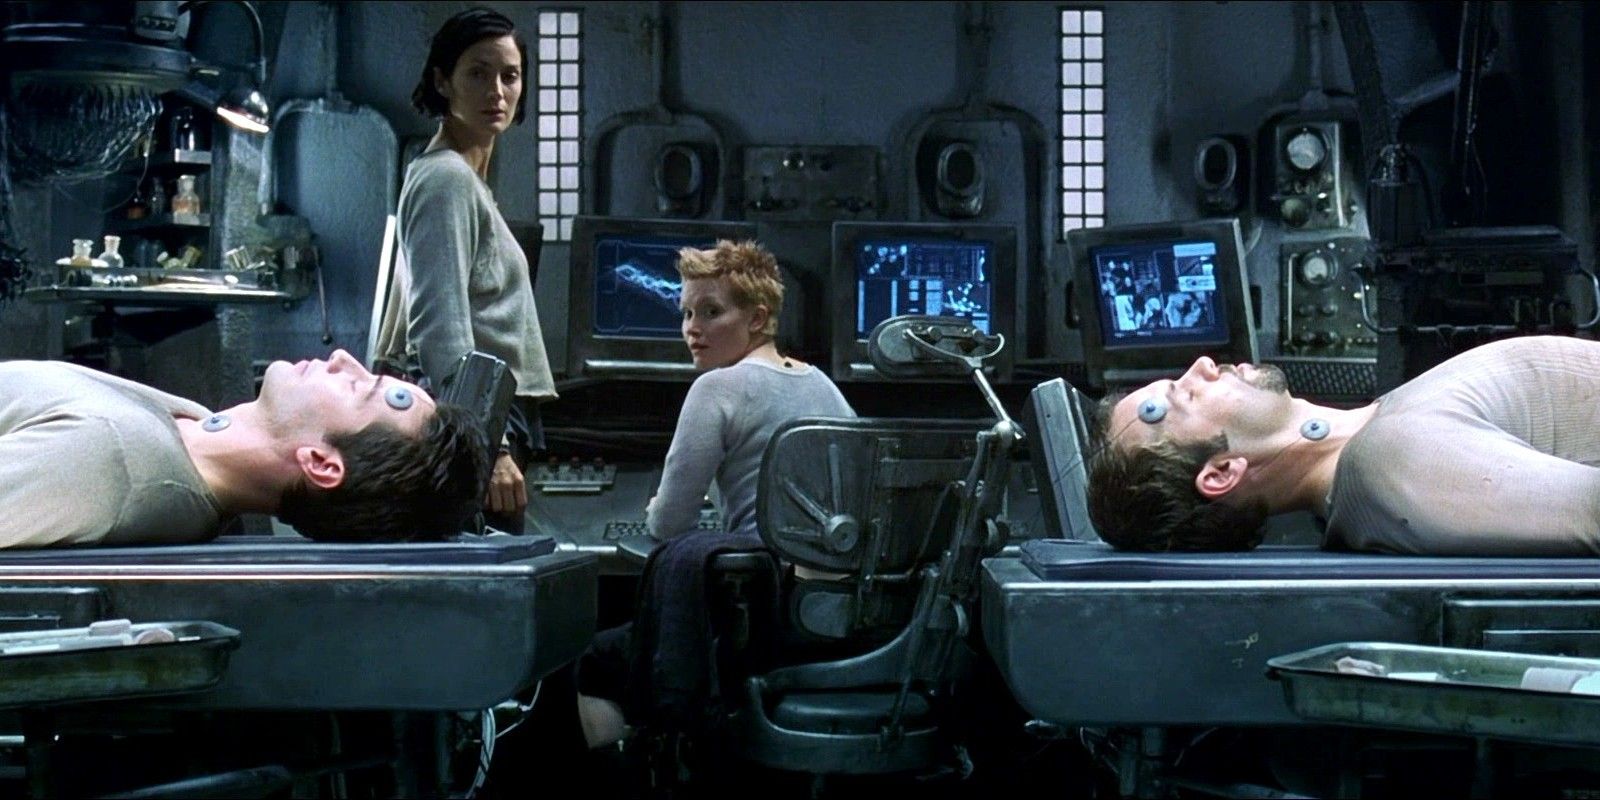 Keanu Reeves as Neo, Carrie-Anne Moss as Trinity and Ian Bliss as Bane in The Matrix